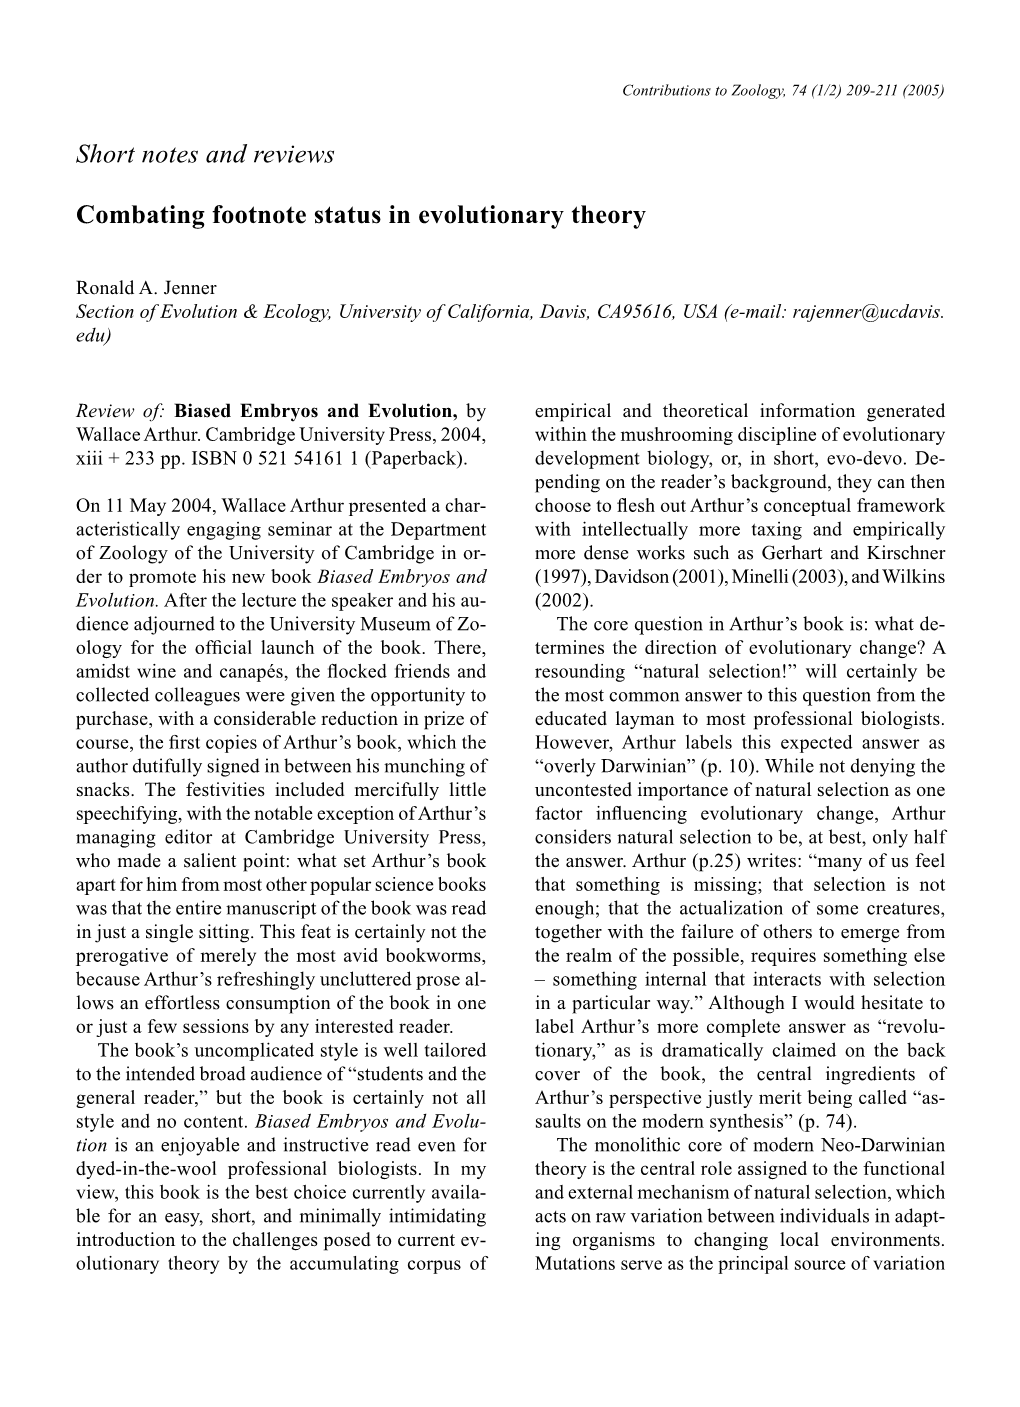 Short Notes and Reviews Combating Footnote Status in Evolutionary Theory